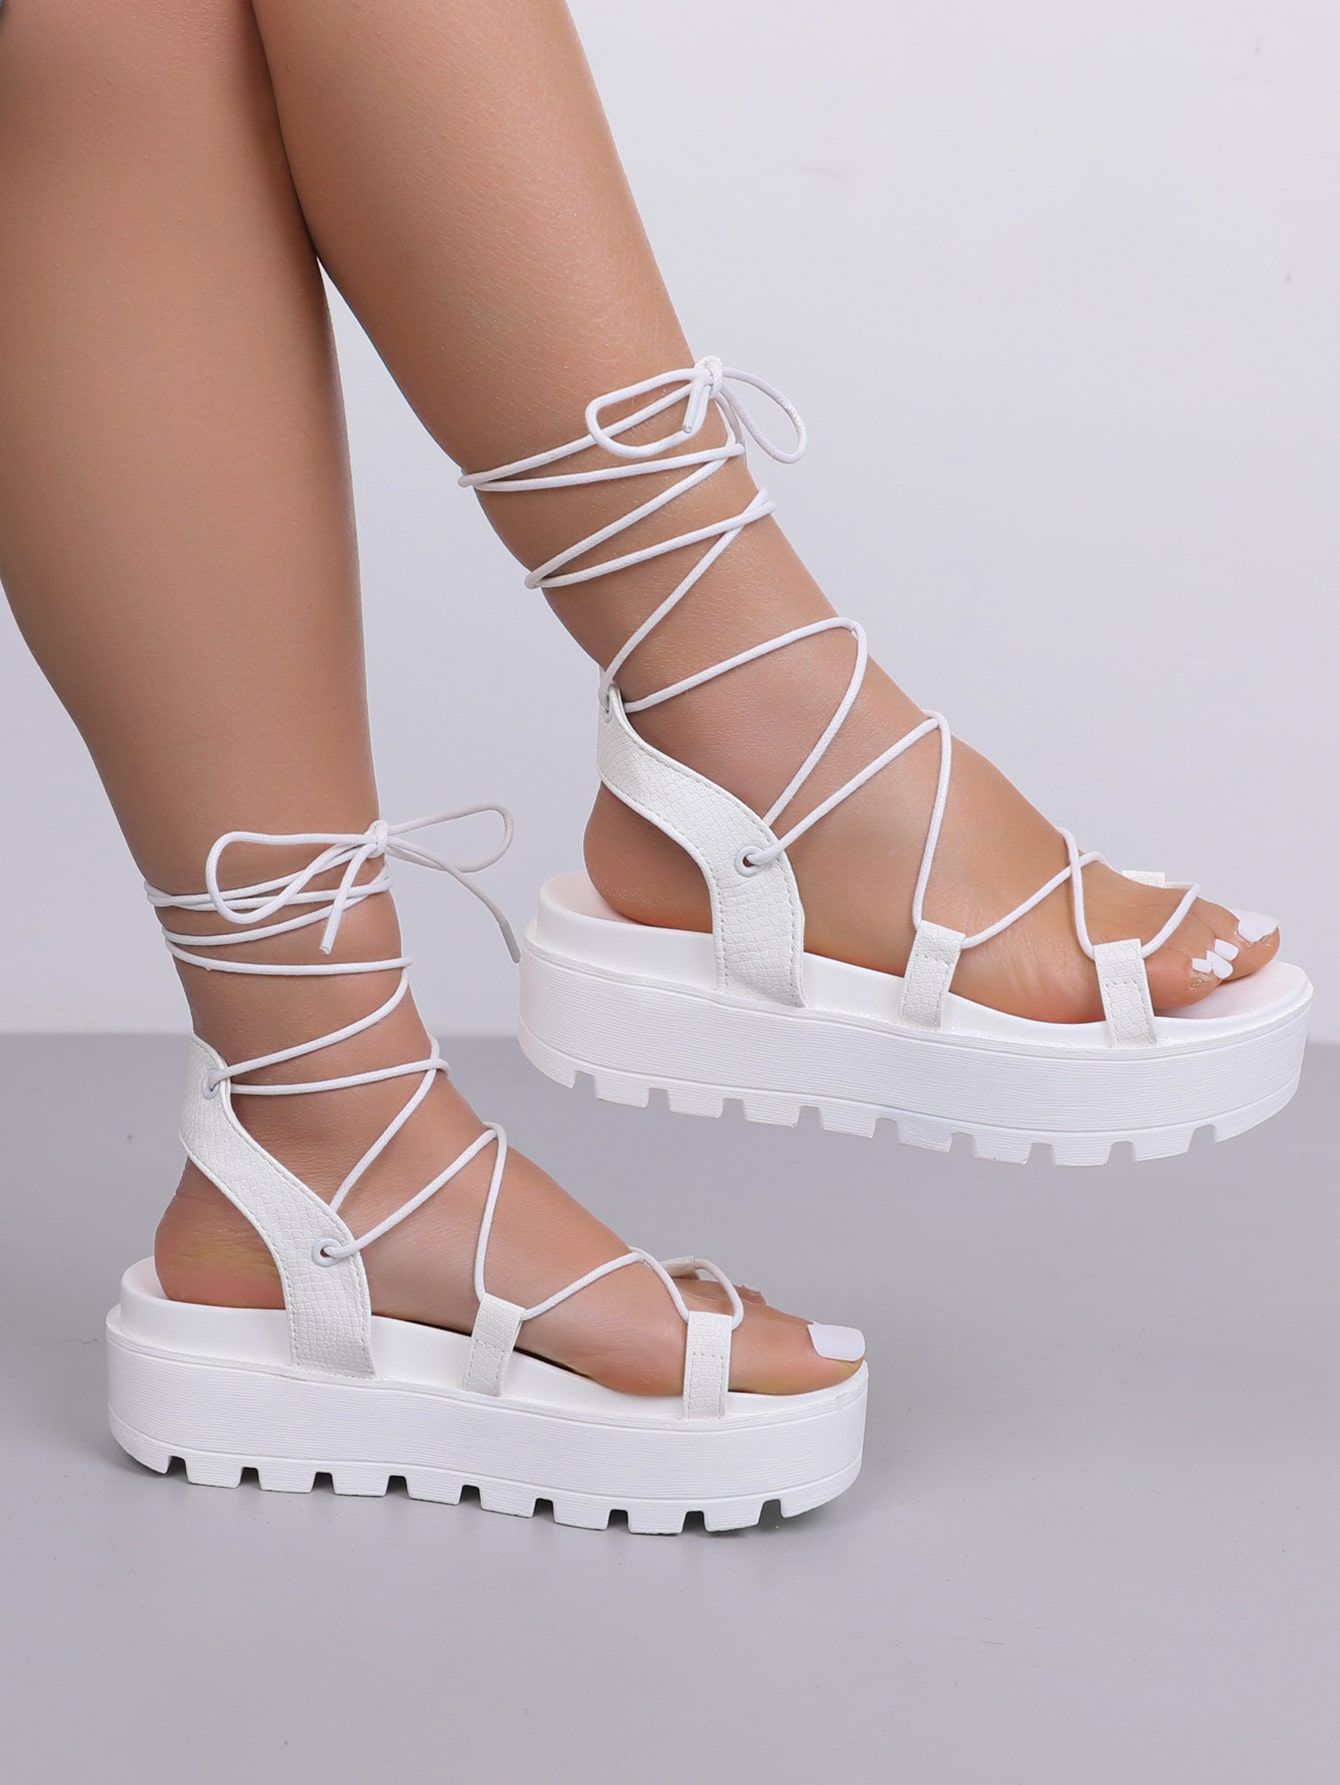 How to Wear Lace Up Wedge Sandals: Top 13 Outfits Ideas for Looking Lean